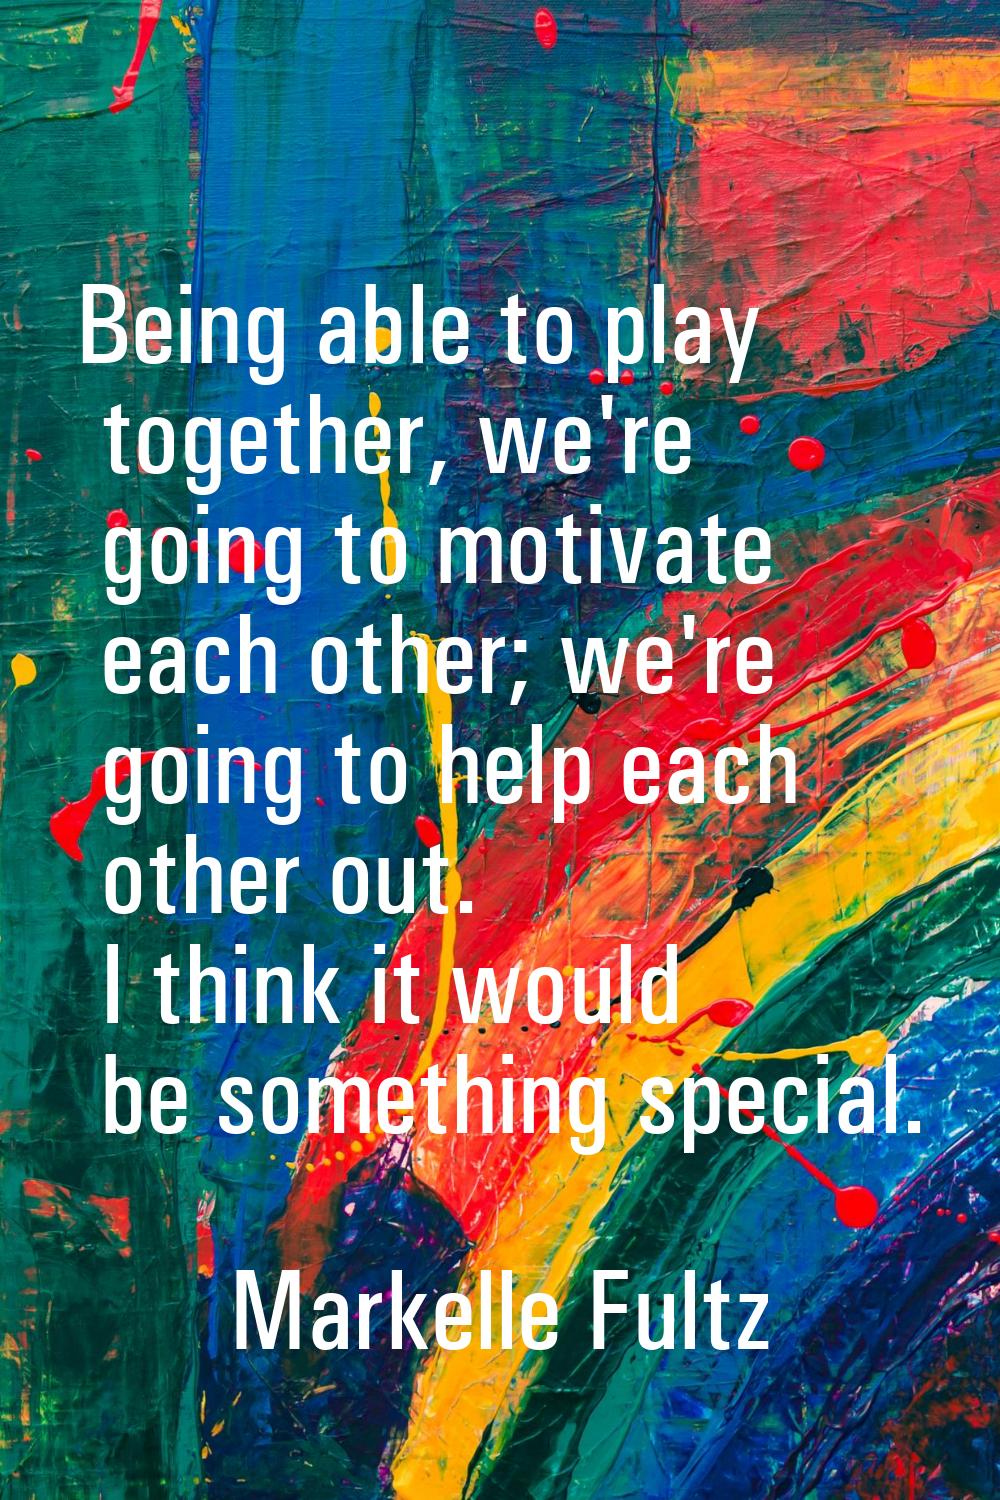 Being able to play together, we're going to motivate each other; we're going to help each other out